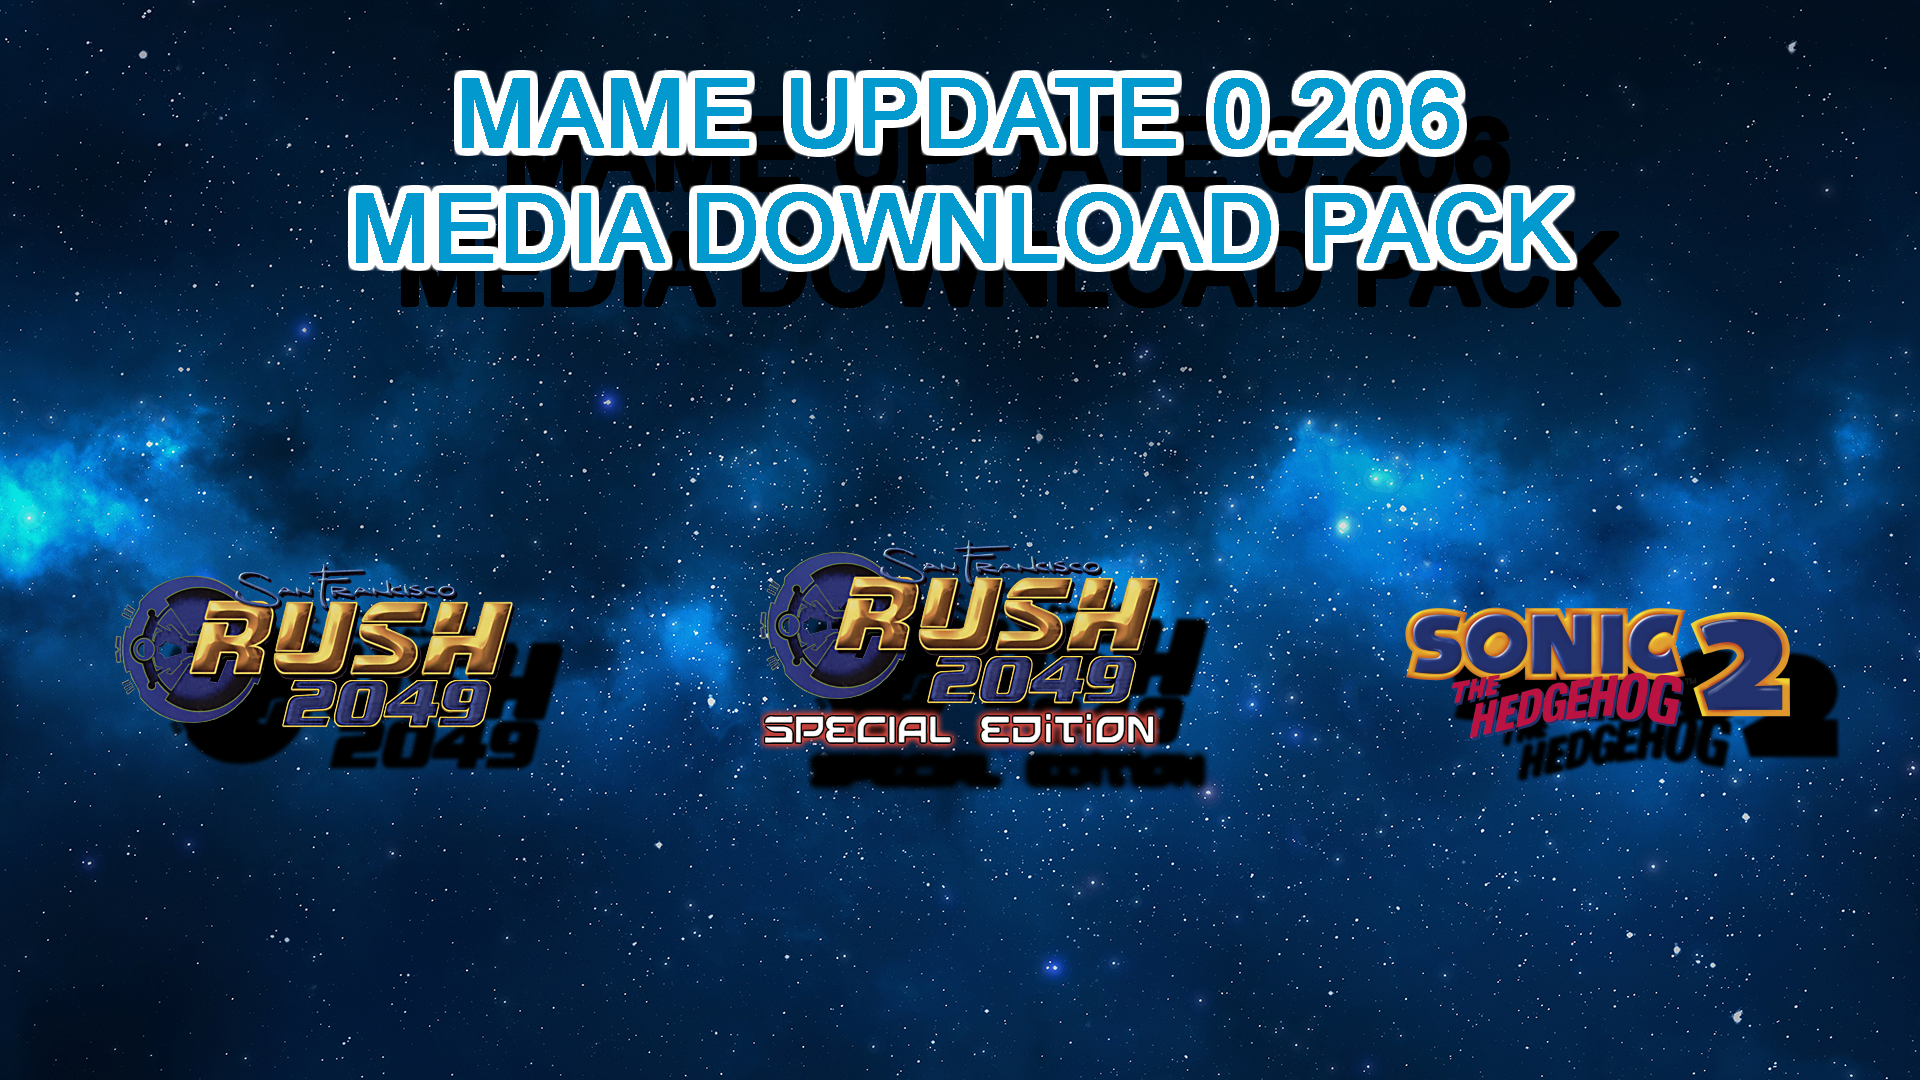 More information about "MAME Update 0.206 New Games Download Pack"